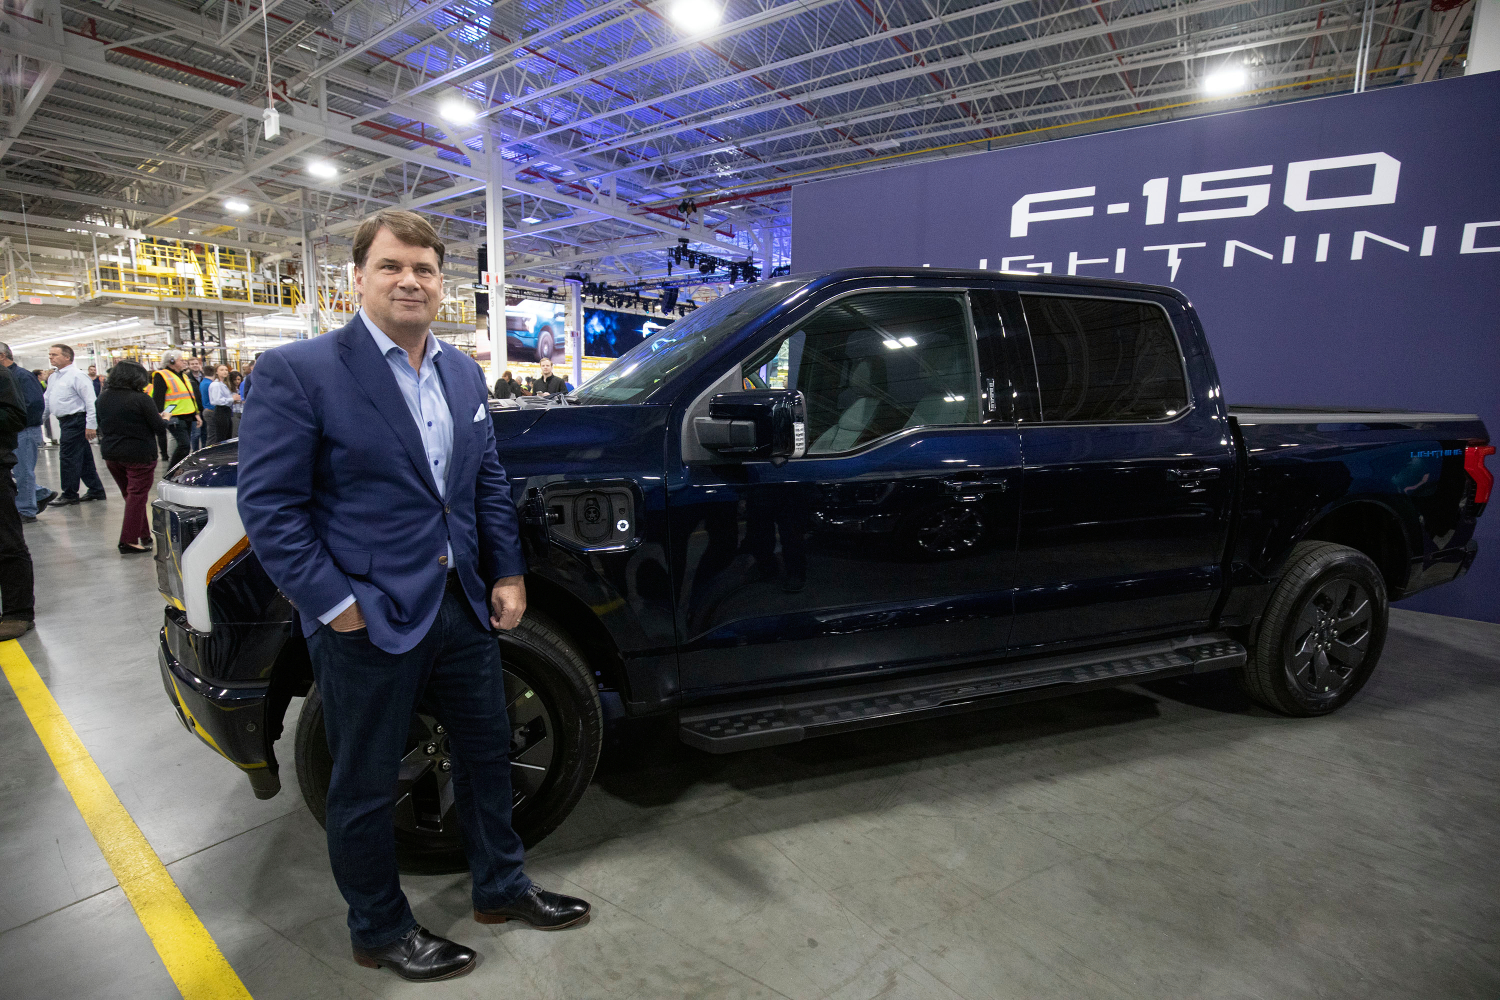 Jay Leno drove the Ford F-150 Lightning electric truck